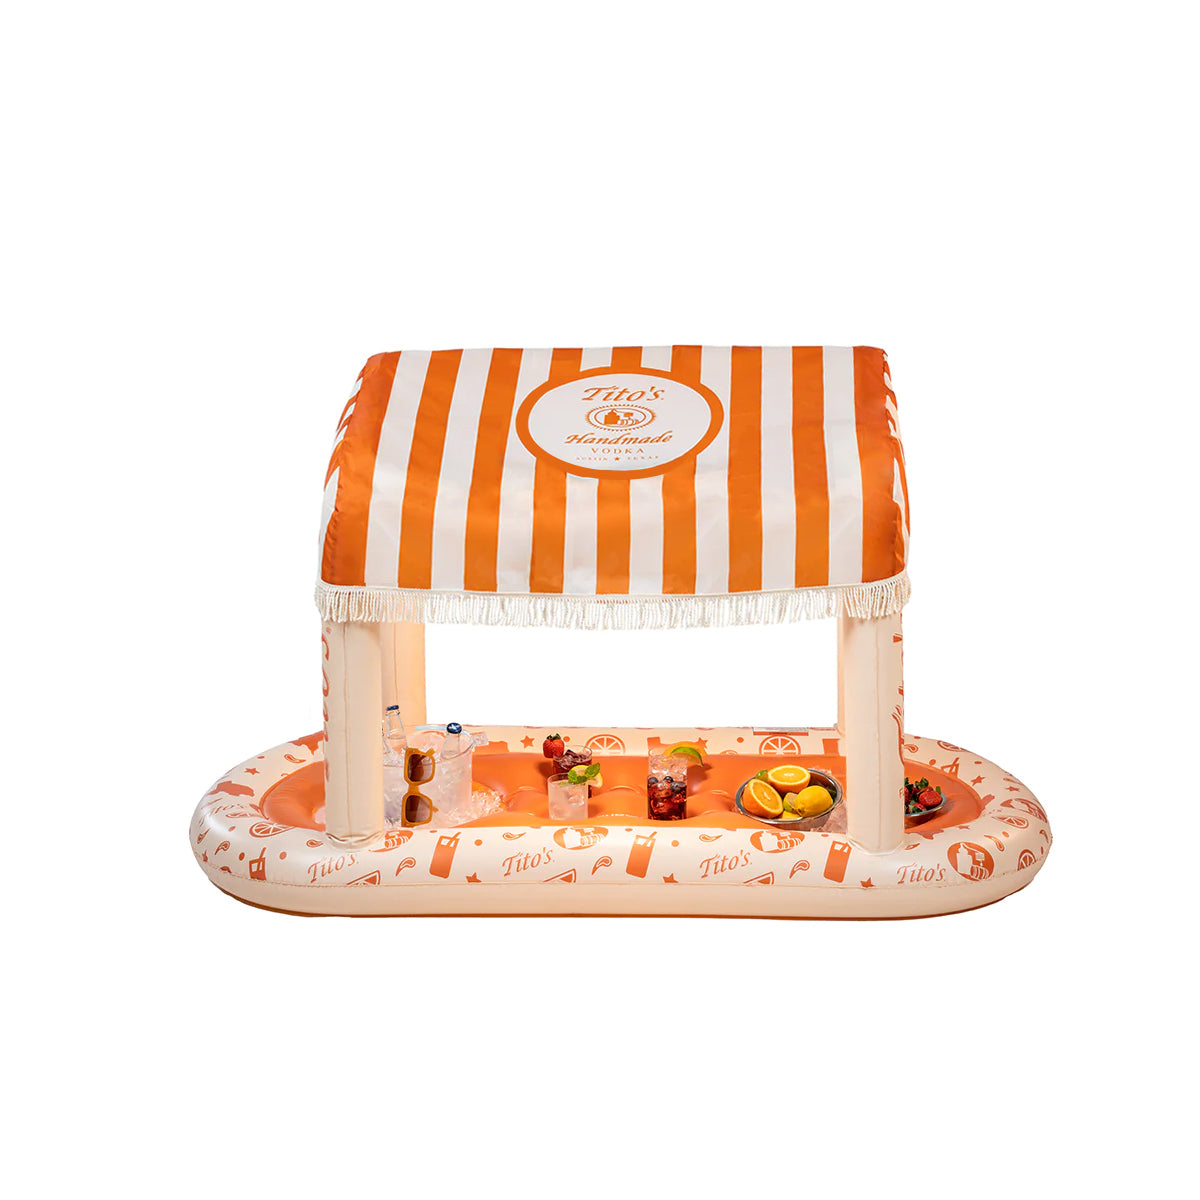 Orange and white FUNBOY inflatable cabana bar with Tito's Handmade Vodka logo and cocktail designs